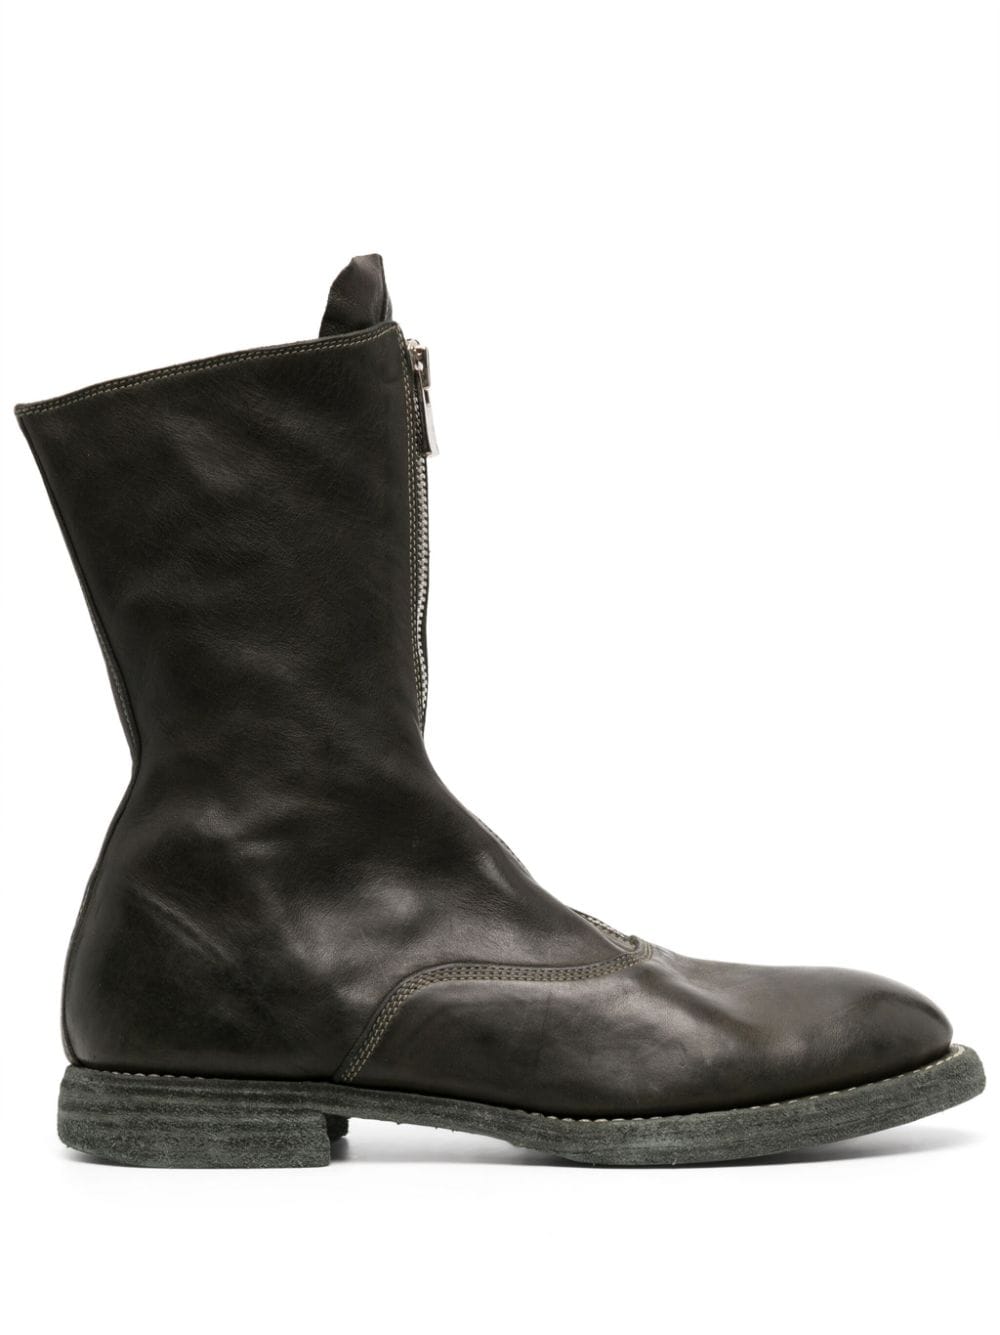 Guidi polished-leather zip-up Boots - Farfetch